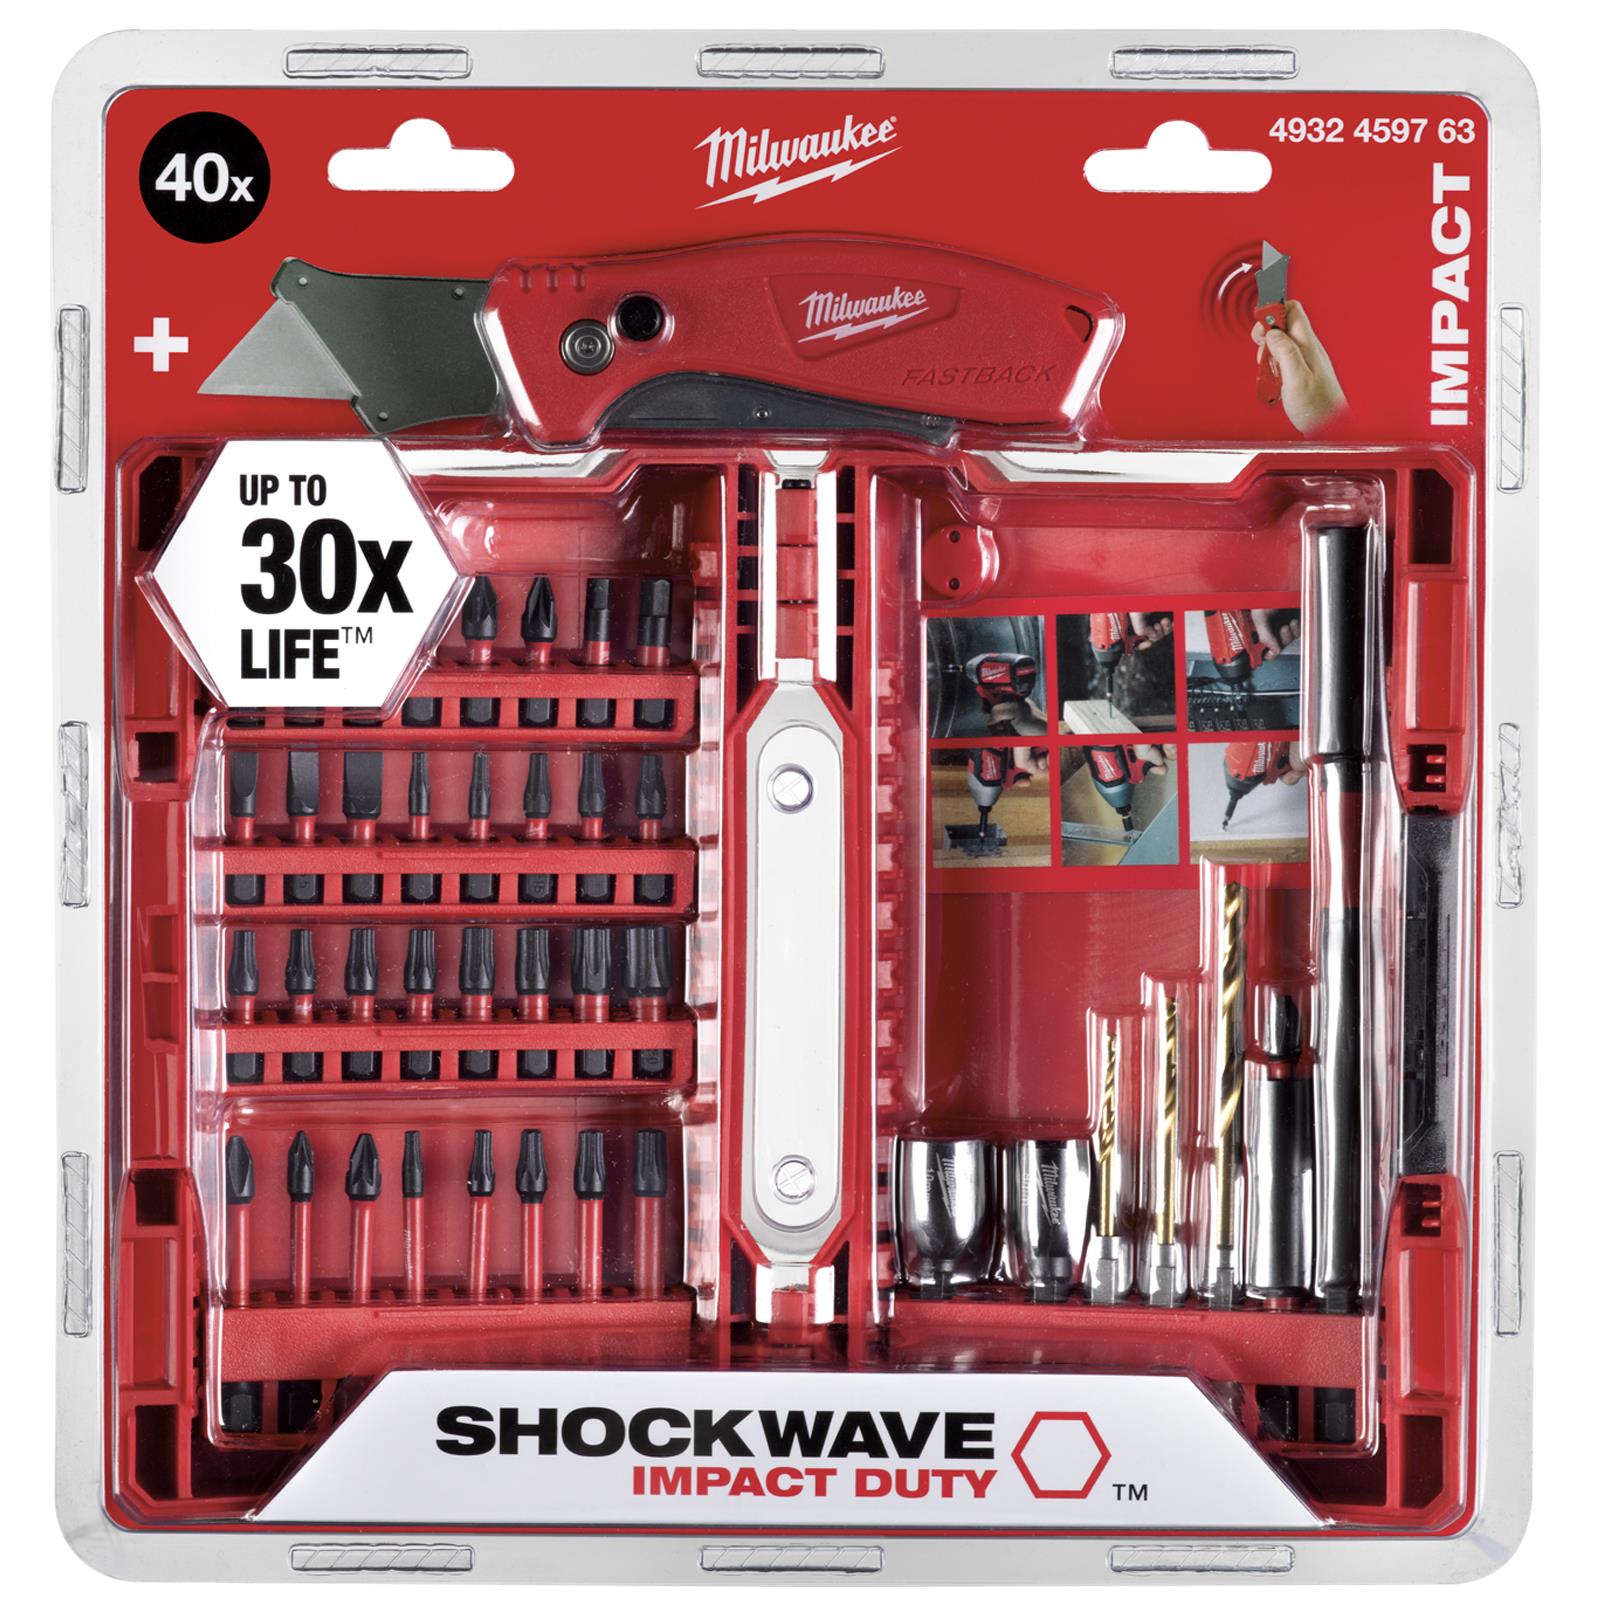 Milwaukee Screwdriver and Drill Bit Set 40 Piece SHOCKWAVE Impact Duty and Compact Knife